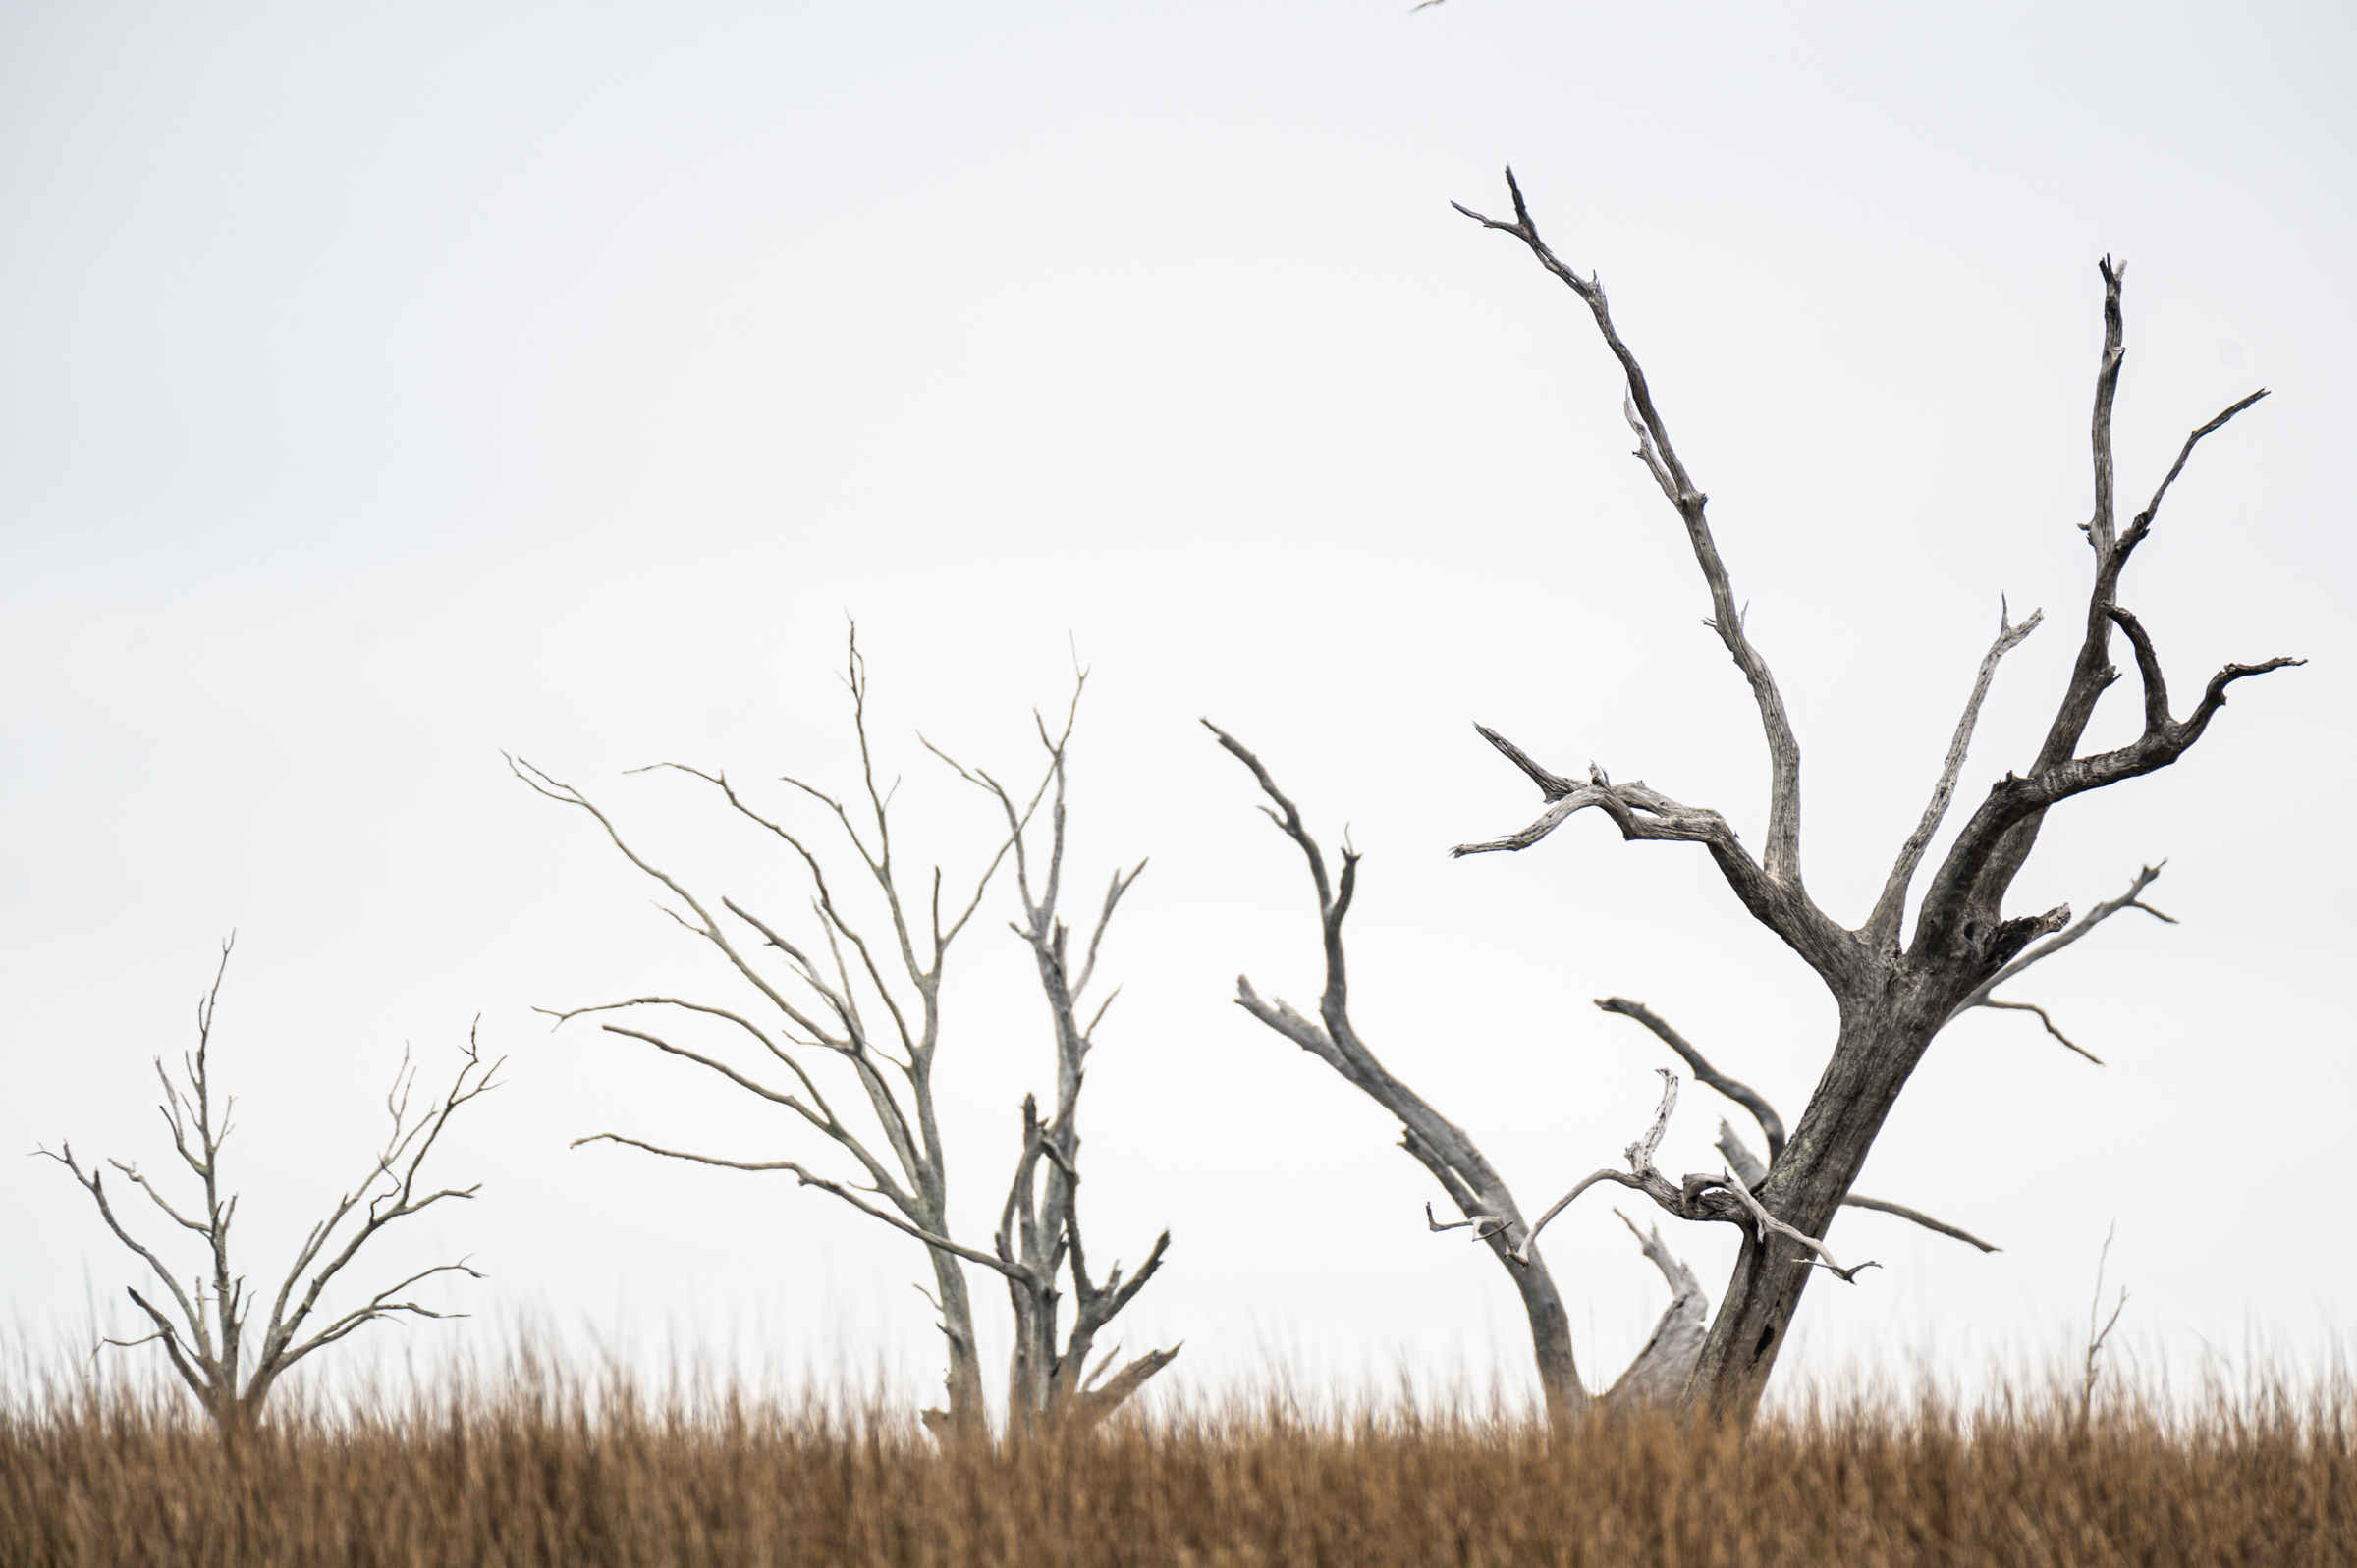 Ghost oaks in the marsh of Point-Aux-Chenes, Louisiana